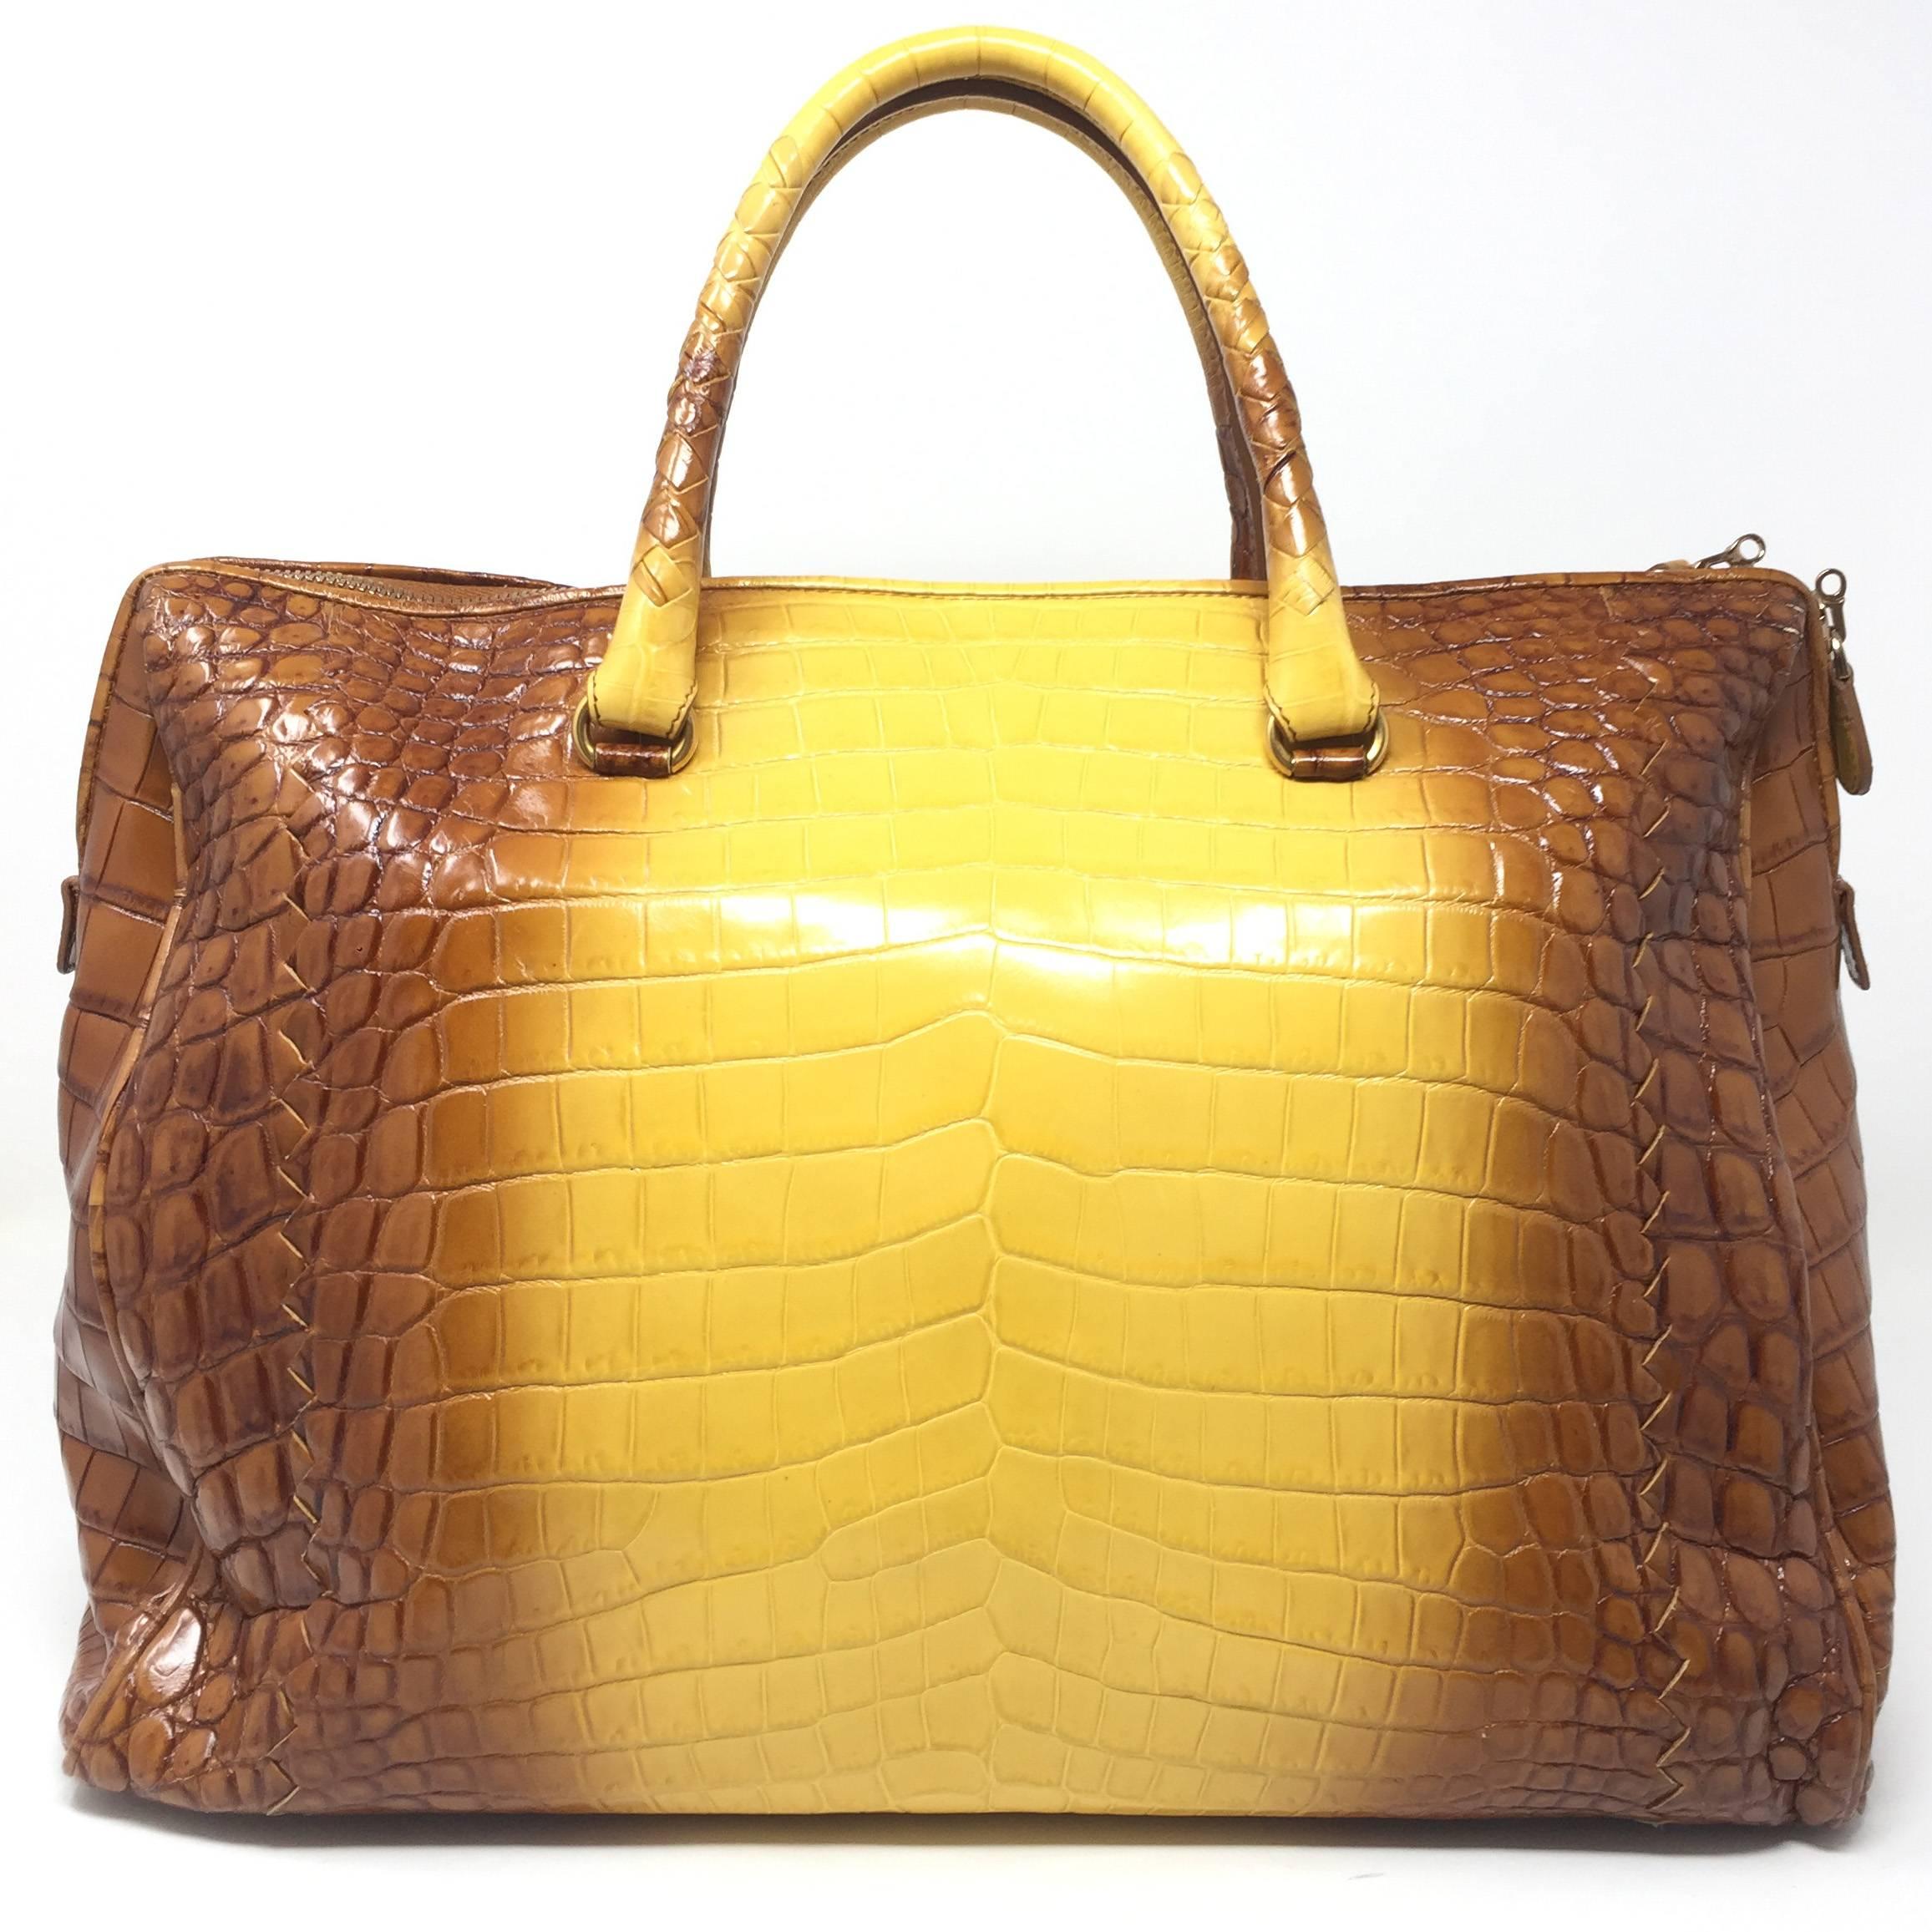 The Cocco Glace Bag by Bottega Veneta is a beautiful bag made of shiny crocodile leather, has an elegant dègradé color that fades from caramel brown to yellow.

The Cocco Glace Bag has double handles and a double zip closure, it also has a padlock